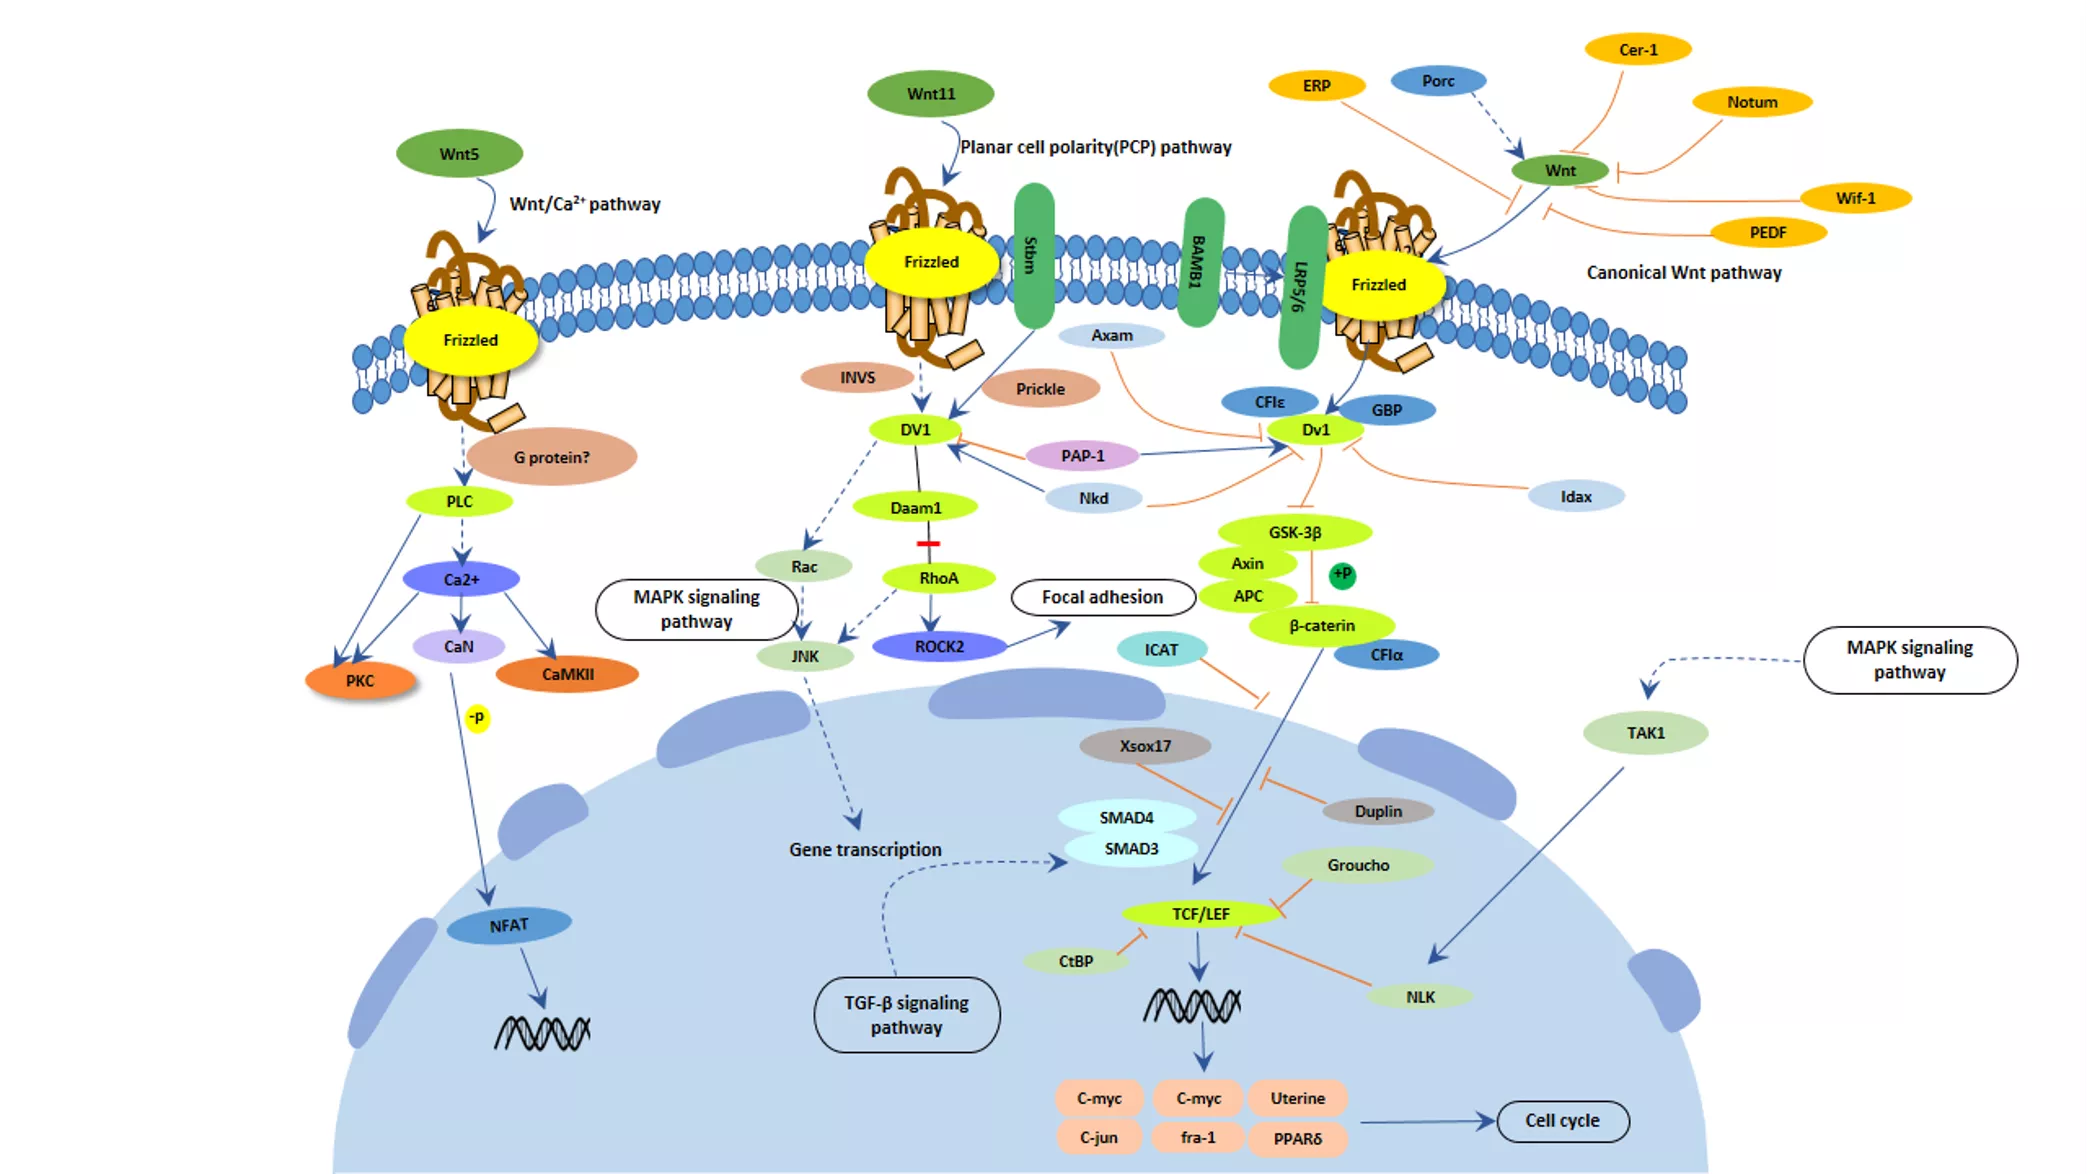 The WNT signalling pathway is incredibly complicated